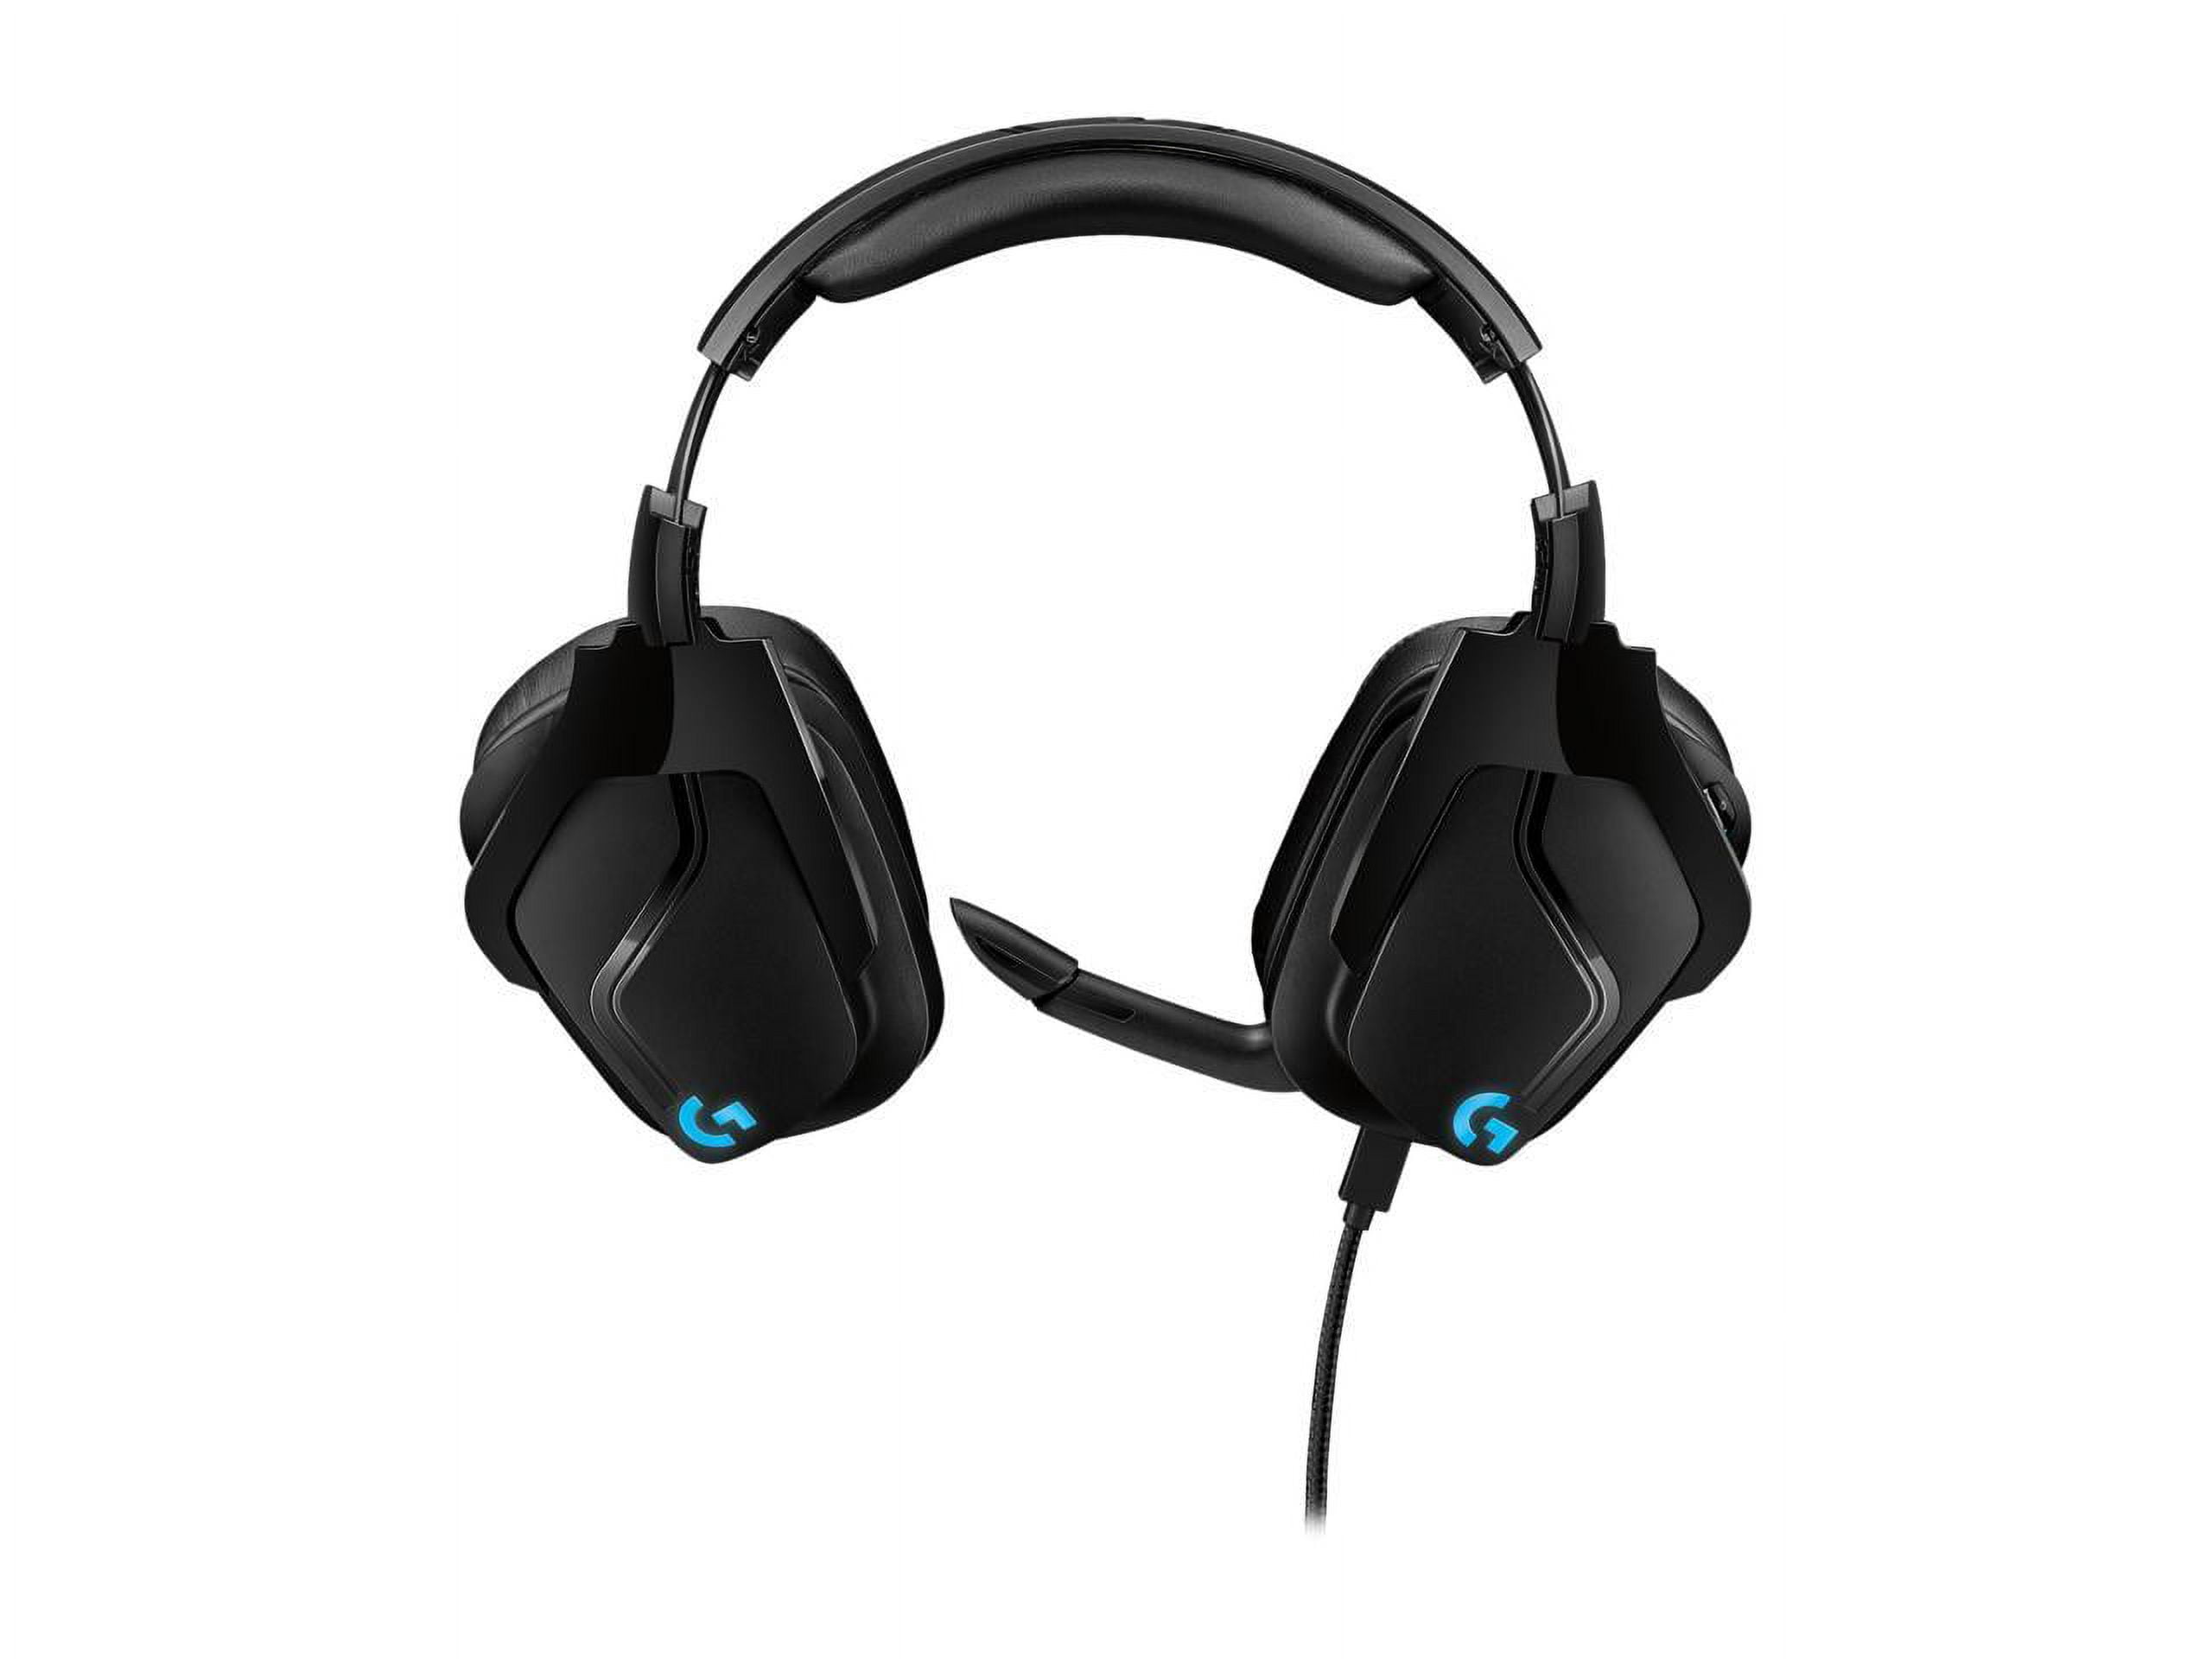 Rent Logitech G935 Over-ear Gaming Headphones from €7.90 per month